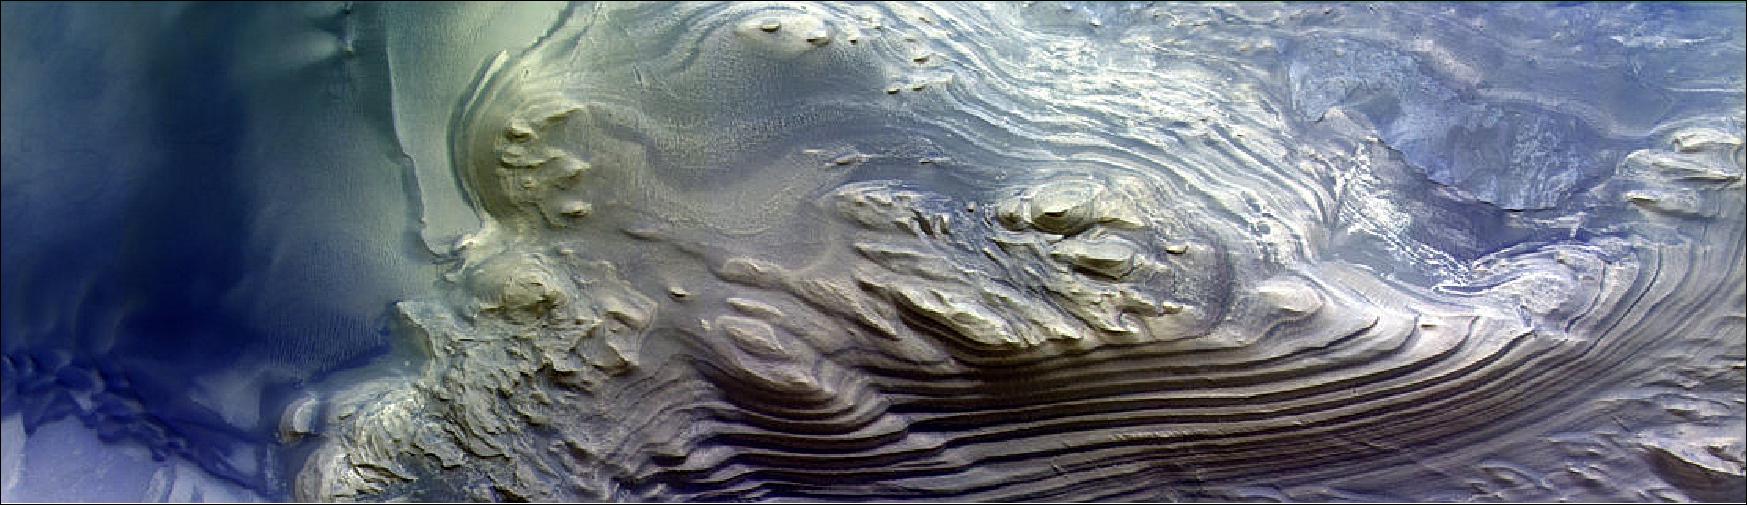 Figure 86: Layered mound in Juventae Chasma on Mars captured by CaSSIS on 2 October 2018 (image credit: ESA/Roscosmos/CaSSIS, CC BY-SA 3.0 IGO)